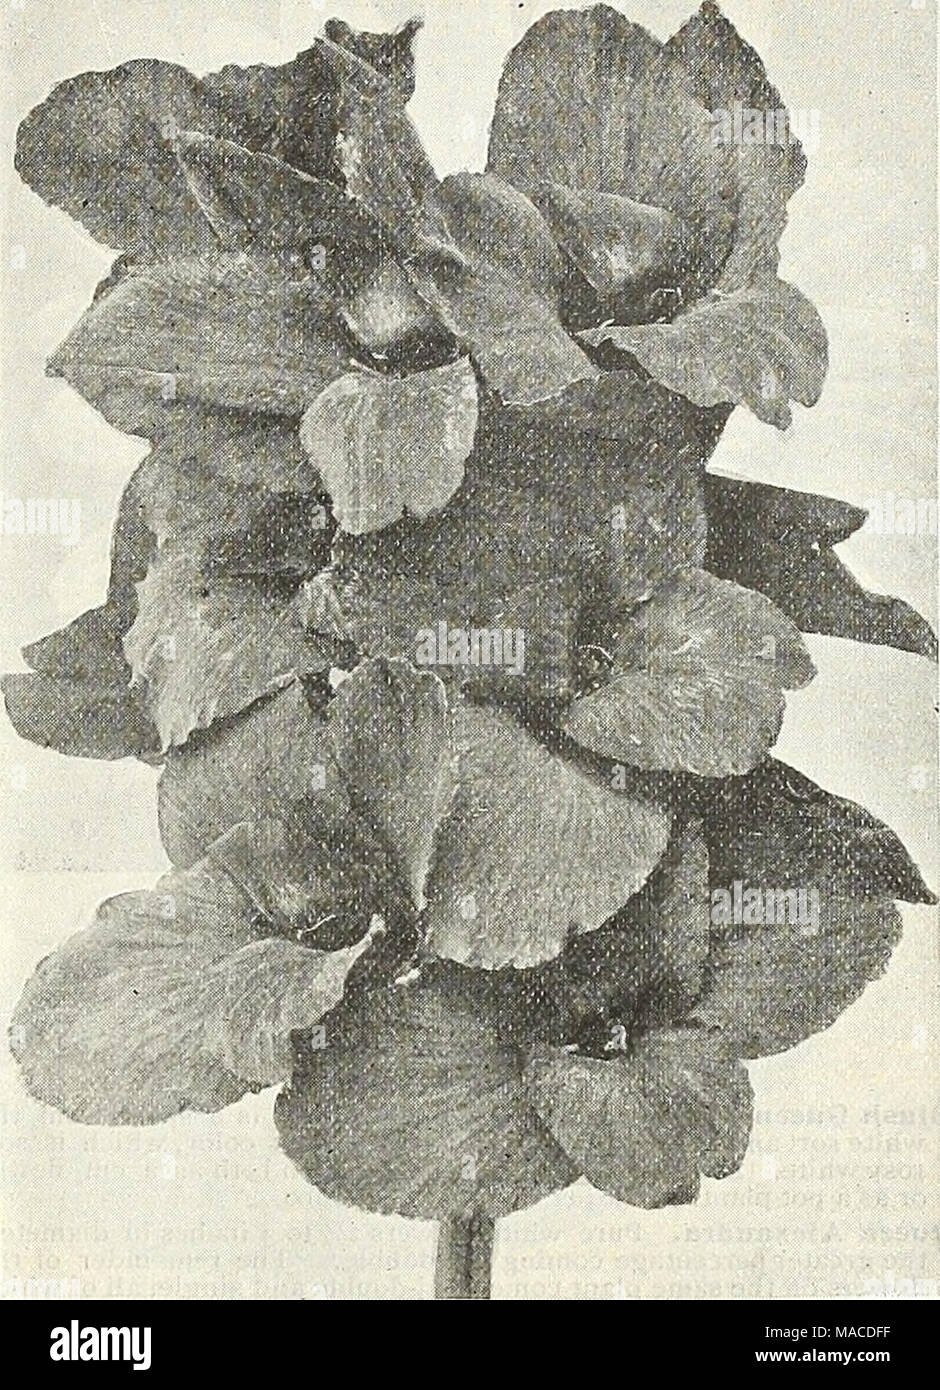 . Dreer's wholesale price list : seeds for florists plants vegetable seeds, tools, fertilizers, sundries, etc . ORCHID-FLOWERED CANNA, KING HUMBERT (offered on page 22) New Carnations of 1907âContinued. Bonnie Maid. Edged white, shading to a pink centre, similar to Prosperity. $1.00 per doz.; $6.00 per 100; $50.00 per 1000. Imperial. A fine variegated variety; exceptionally strong grower. $1.00 per doz.; $6.00 per 100 , $50.00 per loco. Pink Imperial. A beautiful pink sort of Imperial. $1.00 per doz.; $6.00 per 100; $50.00 per 1000. Red Riding Hood. Clear shade of scarlet; clean grower. $1.00  Stock Photo